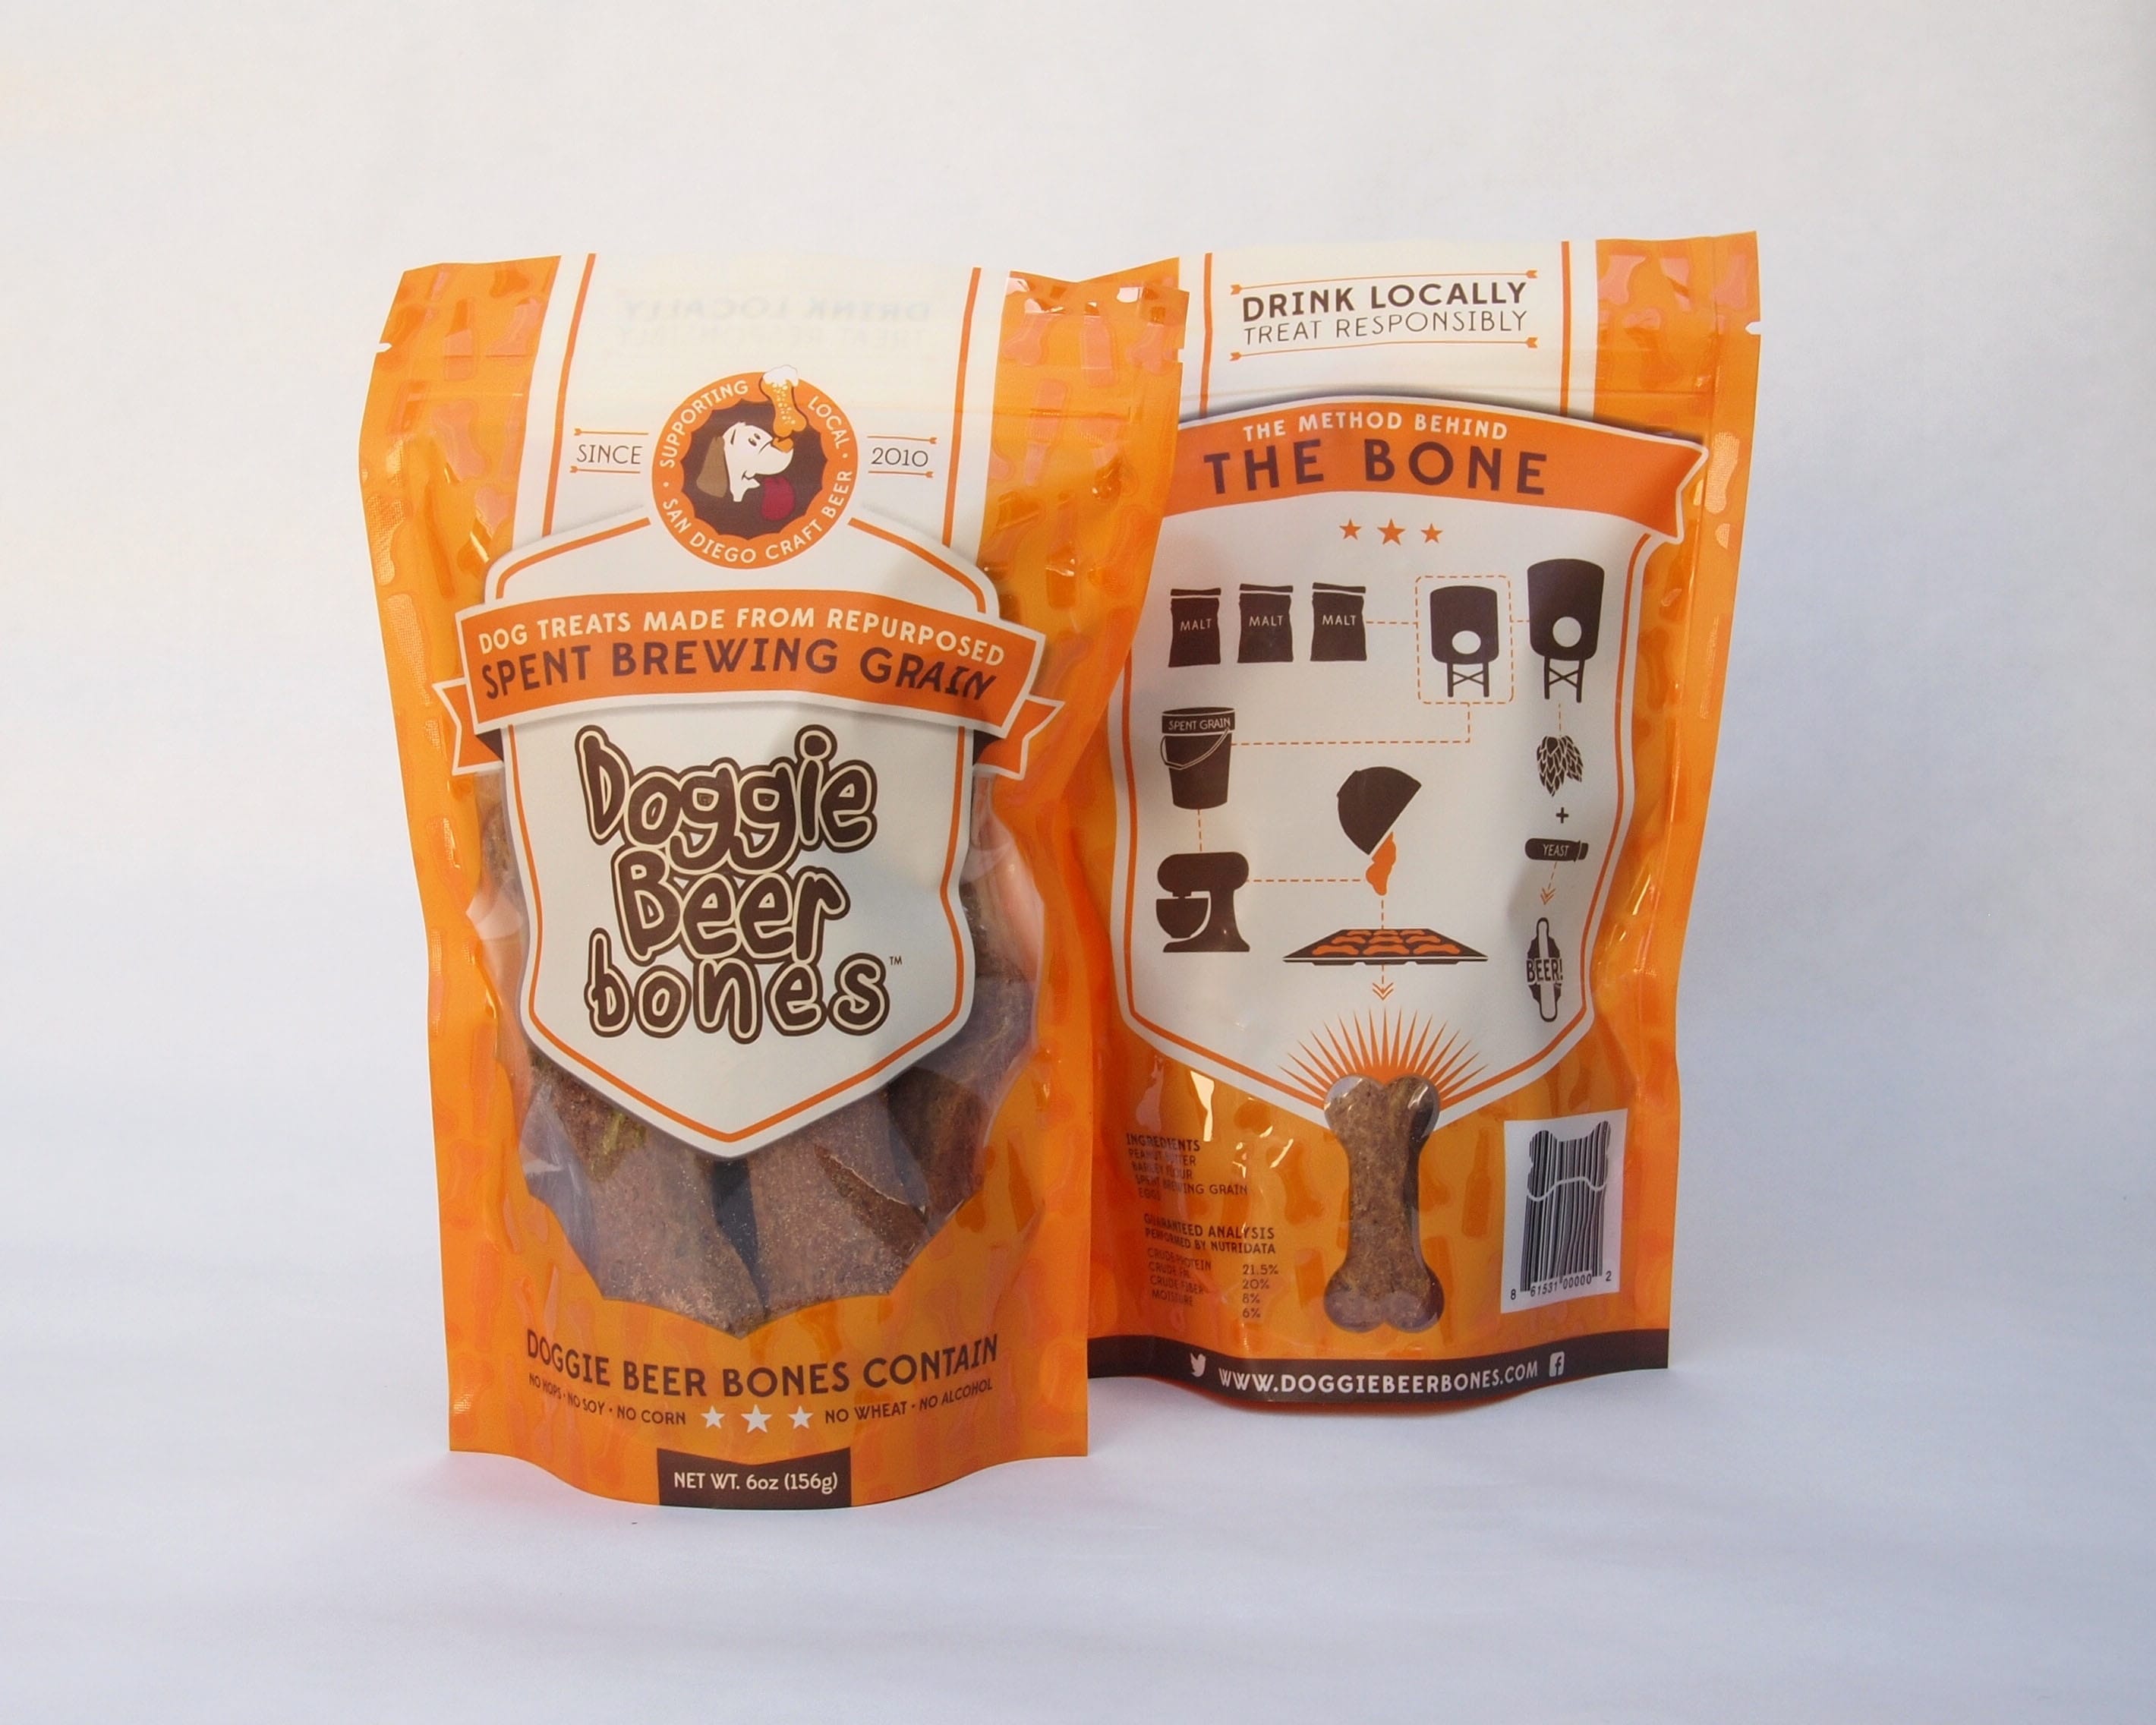 These dog treats are made from spent brewing grain.